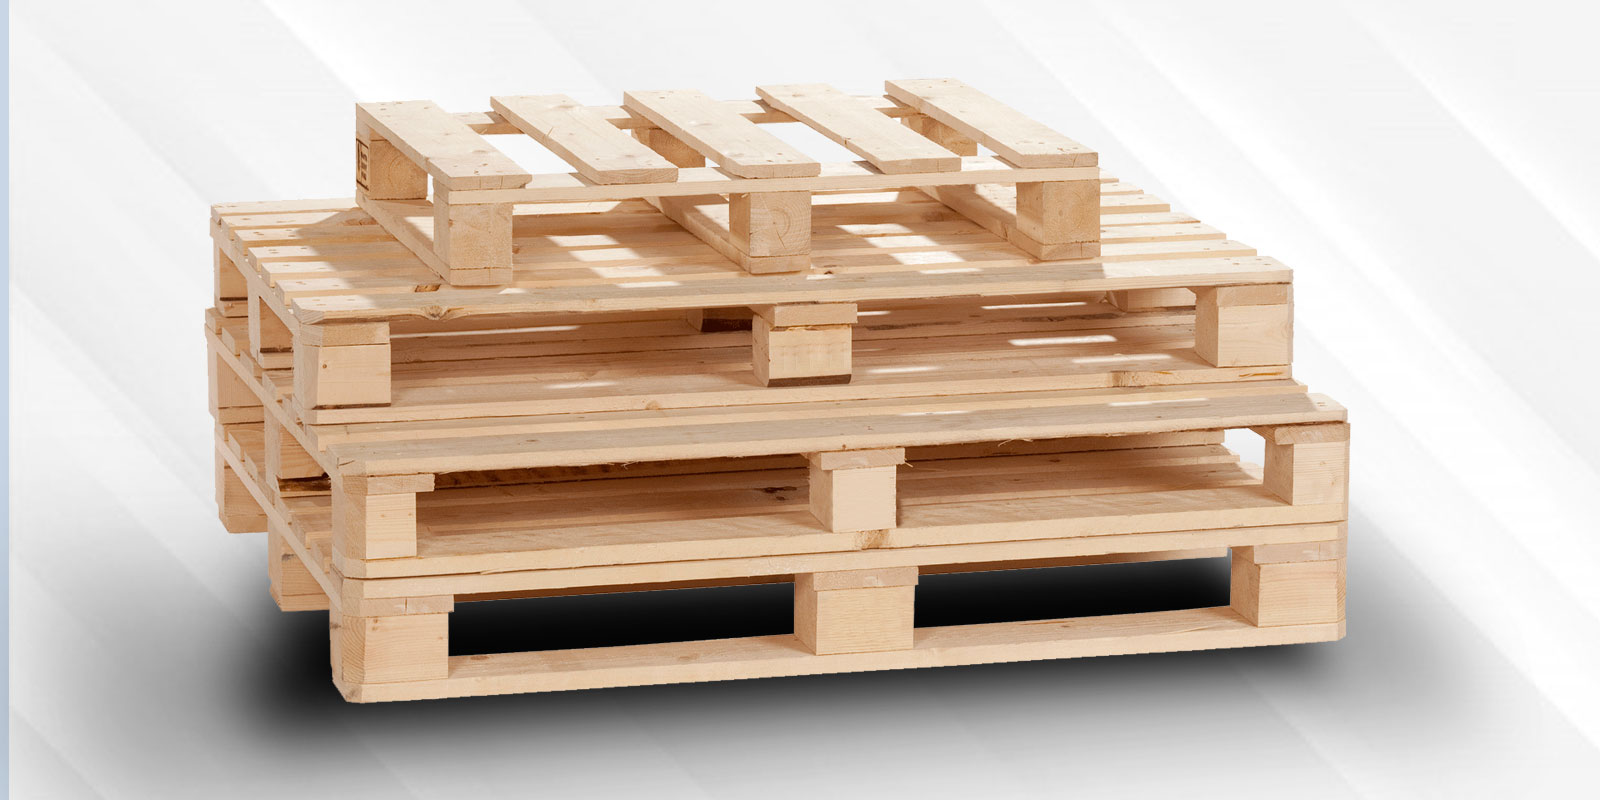 Where to buy wooden pallets?